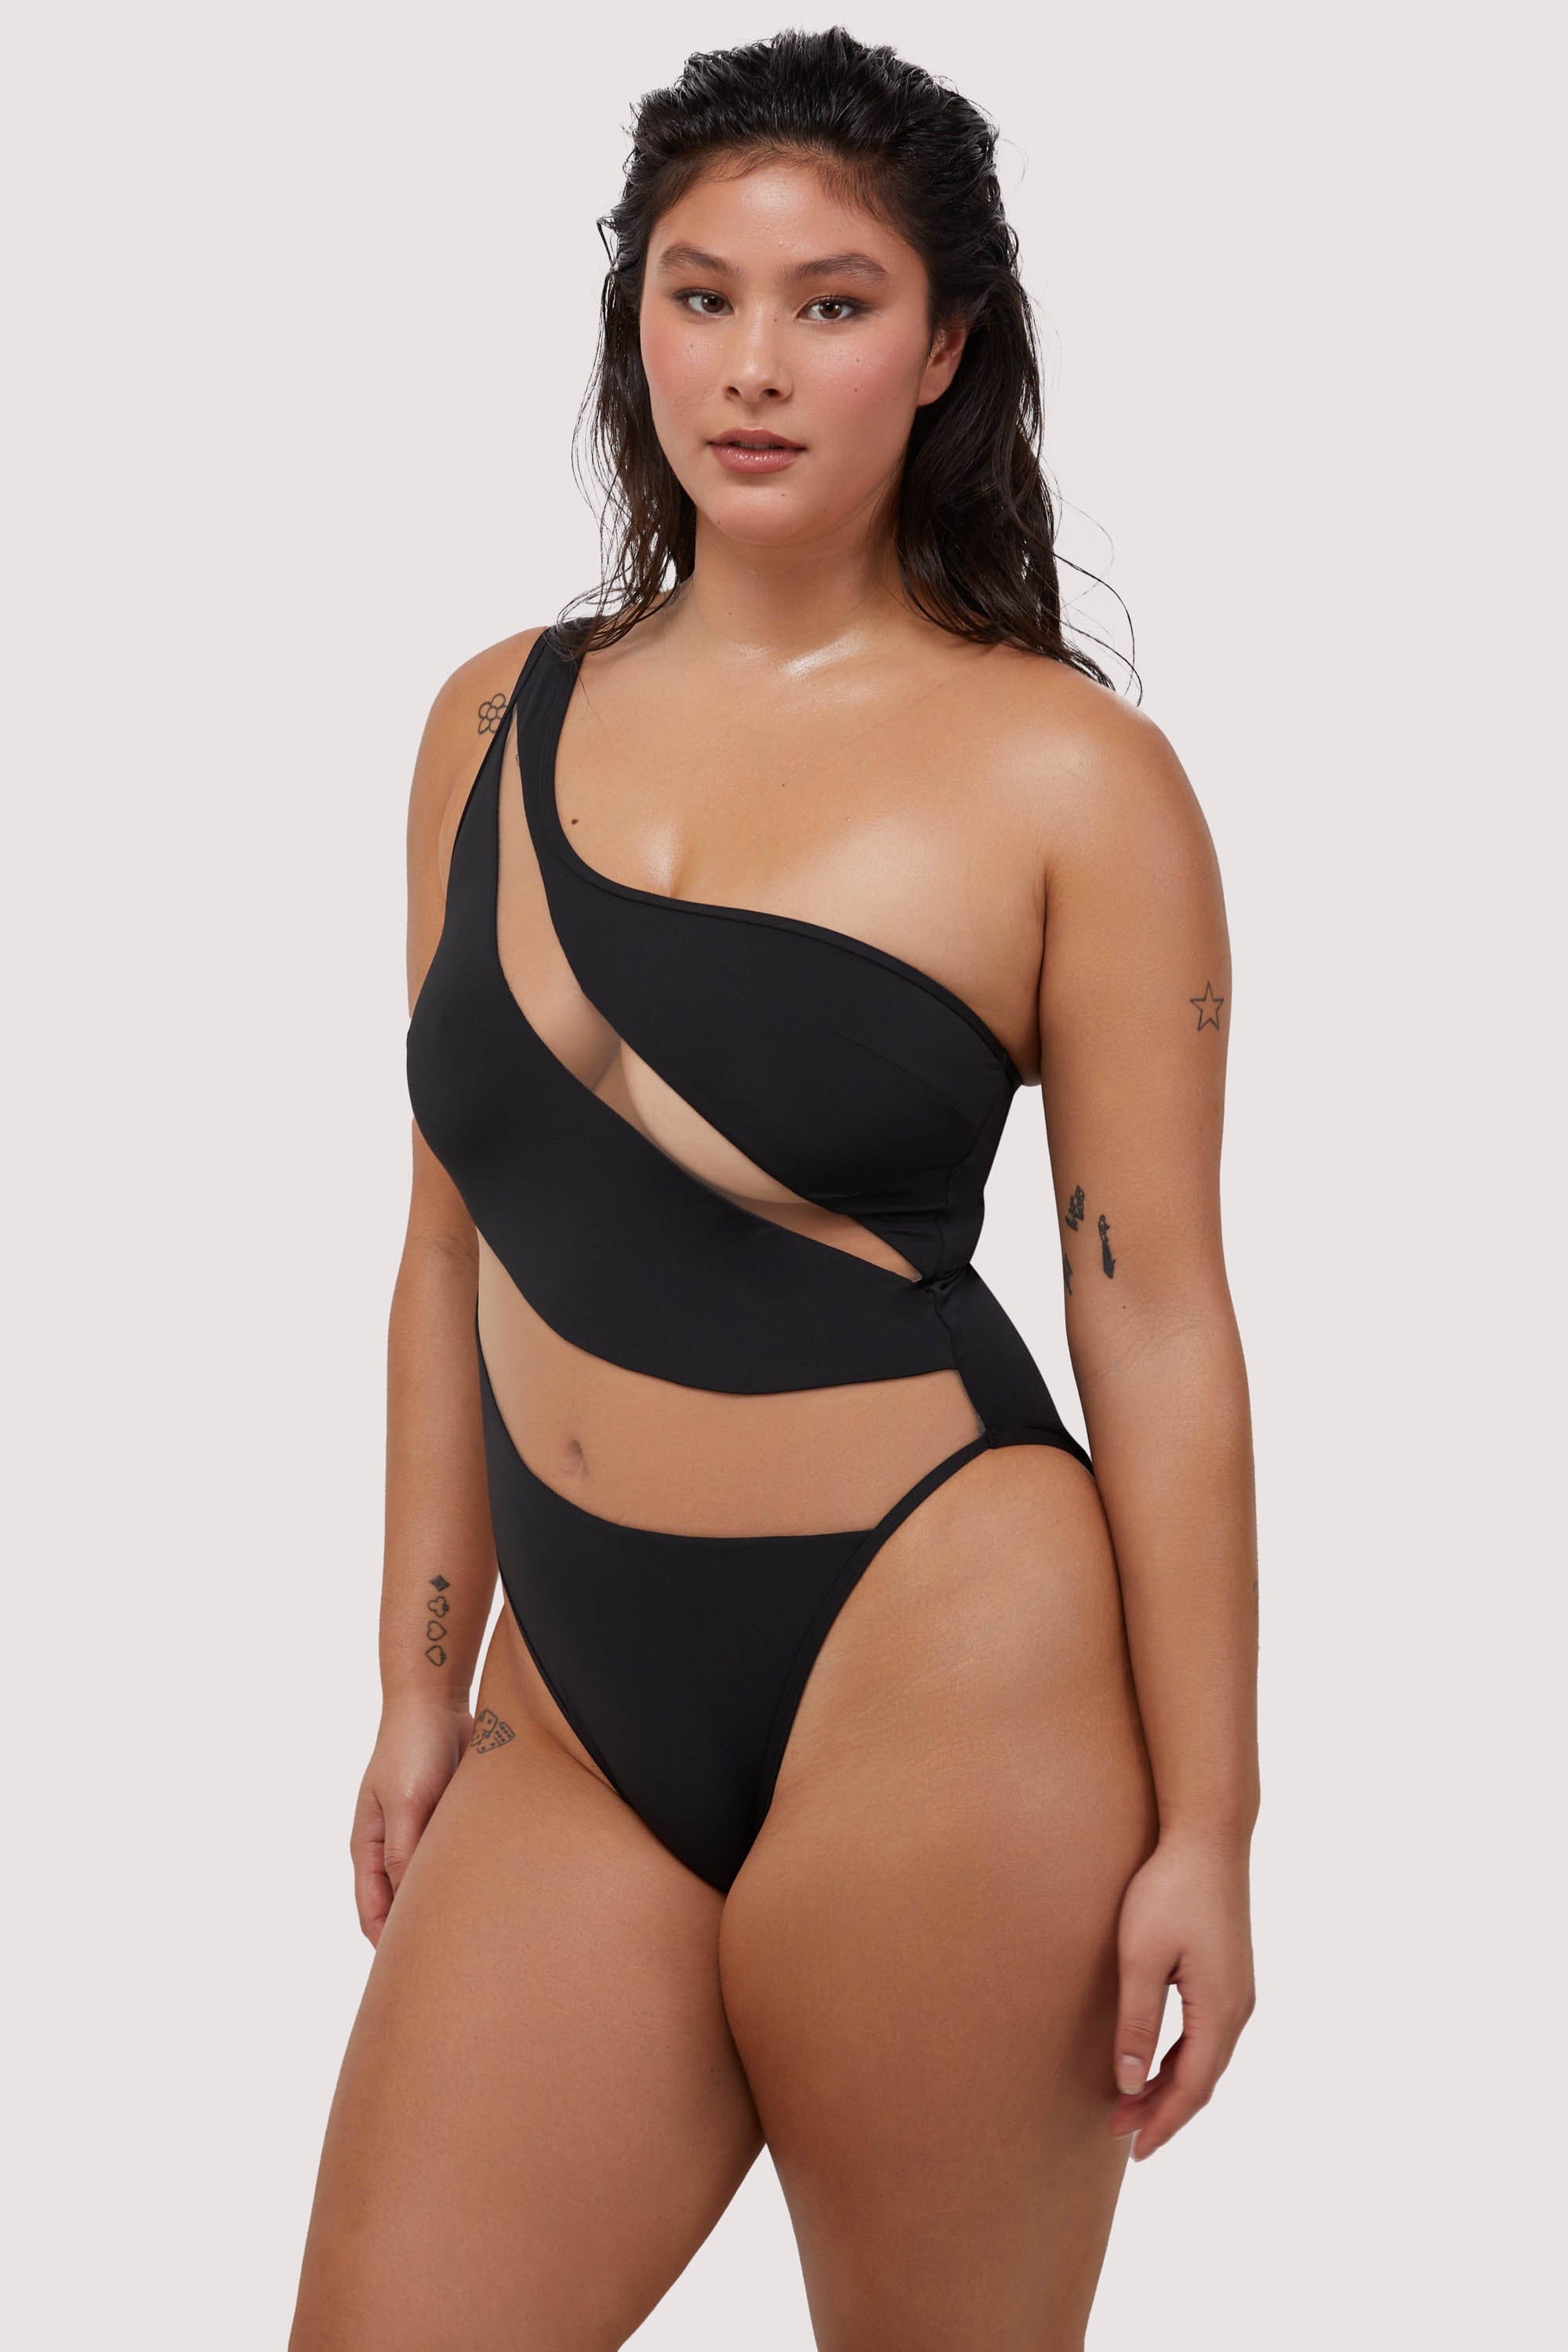 model wears sexy black asymmetrical swimsuit with nude mesh panels